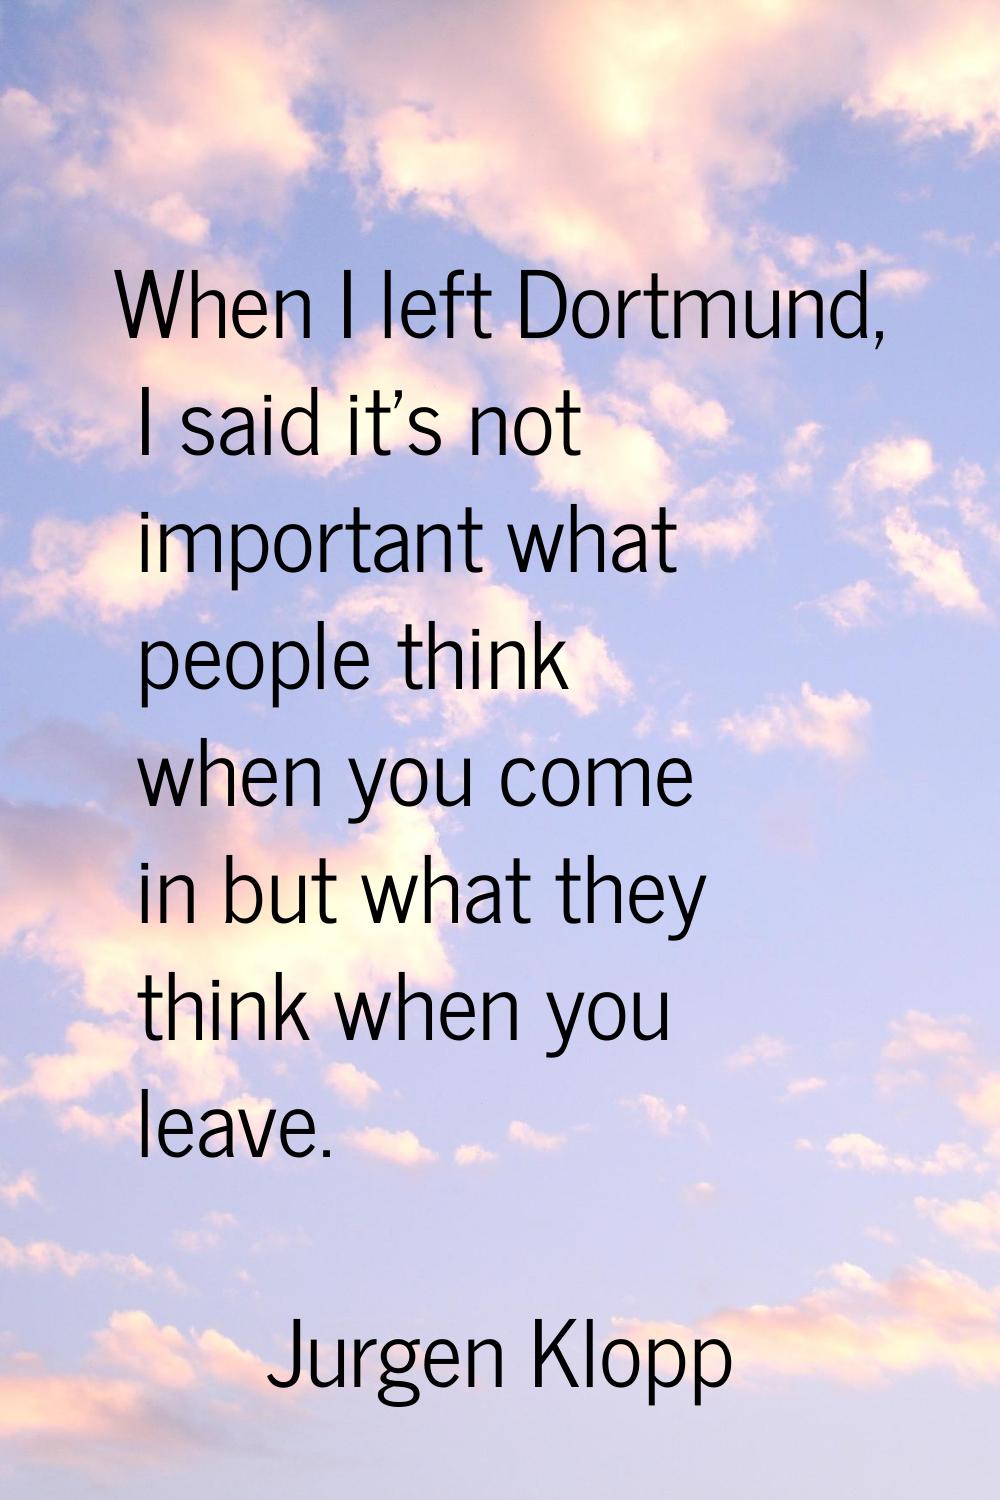 When I left Dortmund, I said it's not important what people think when you come in but what they th